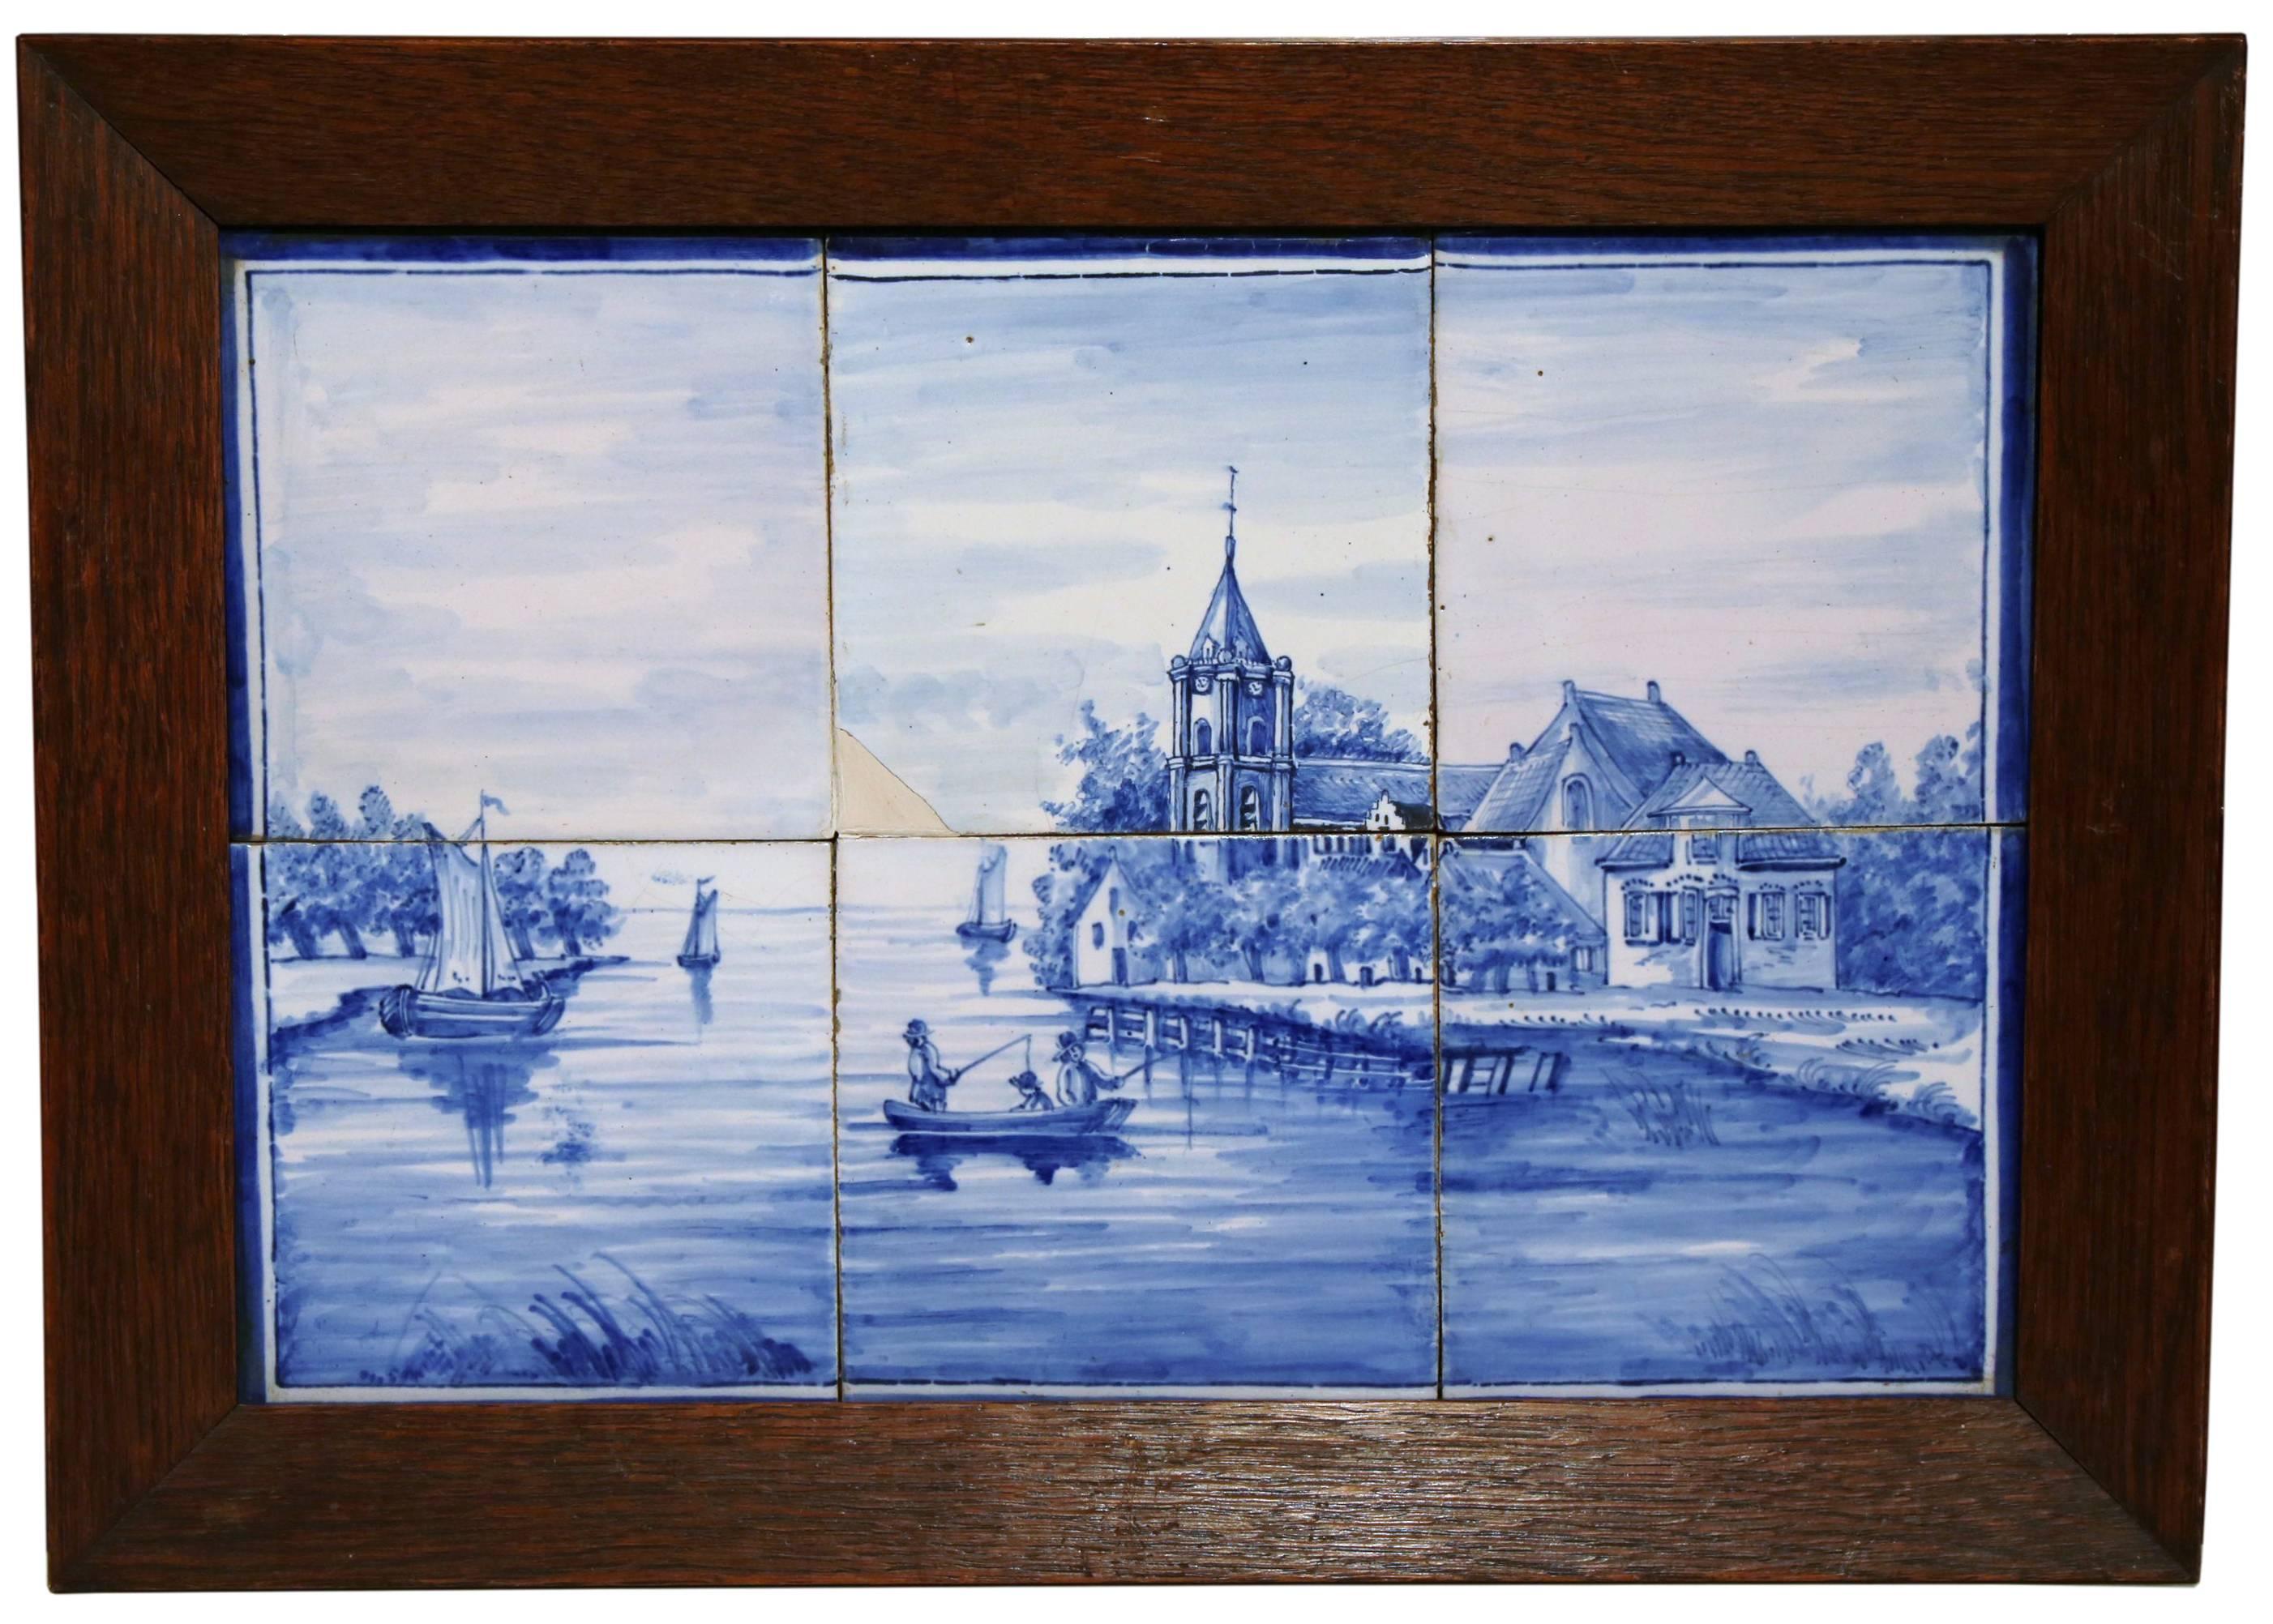 The elegant antique ceramic tiles were created in France, circa 1860. Each wall decor is set inside a carved oak frame, and features six hand painted porcelain faience tiles with illustrations typical of the traditional delft style and coloration;